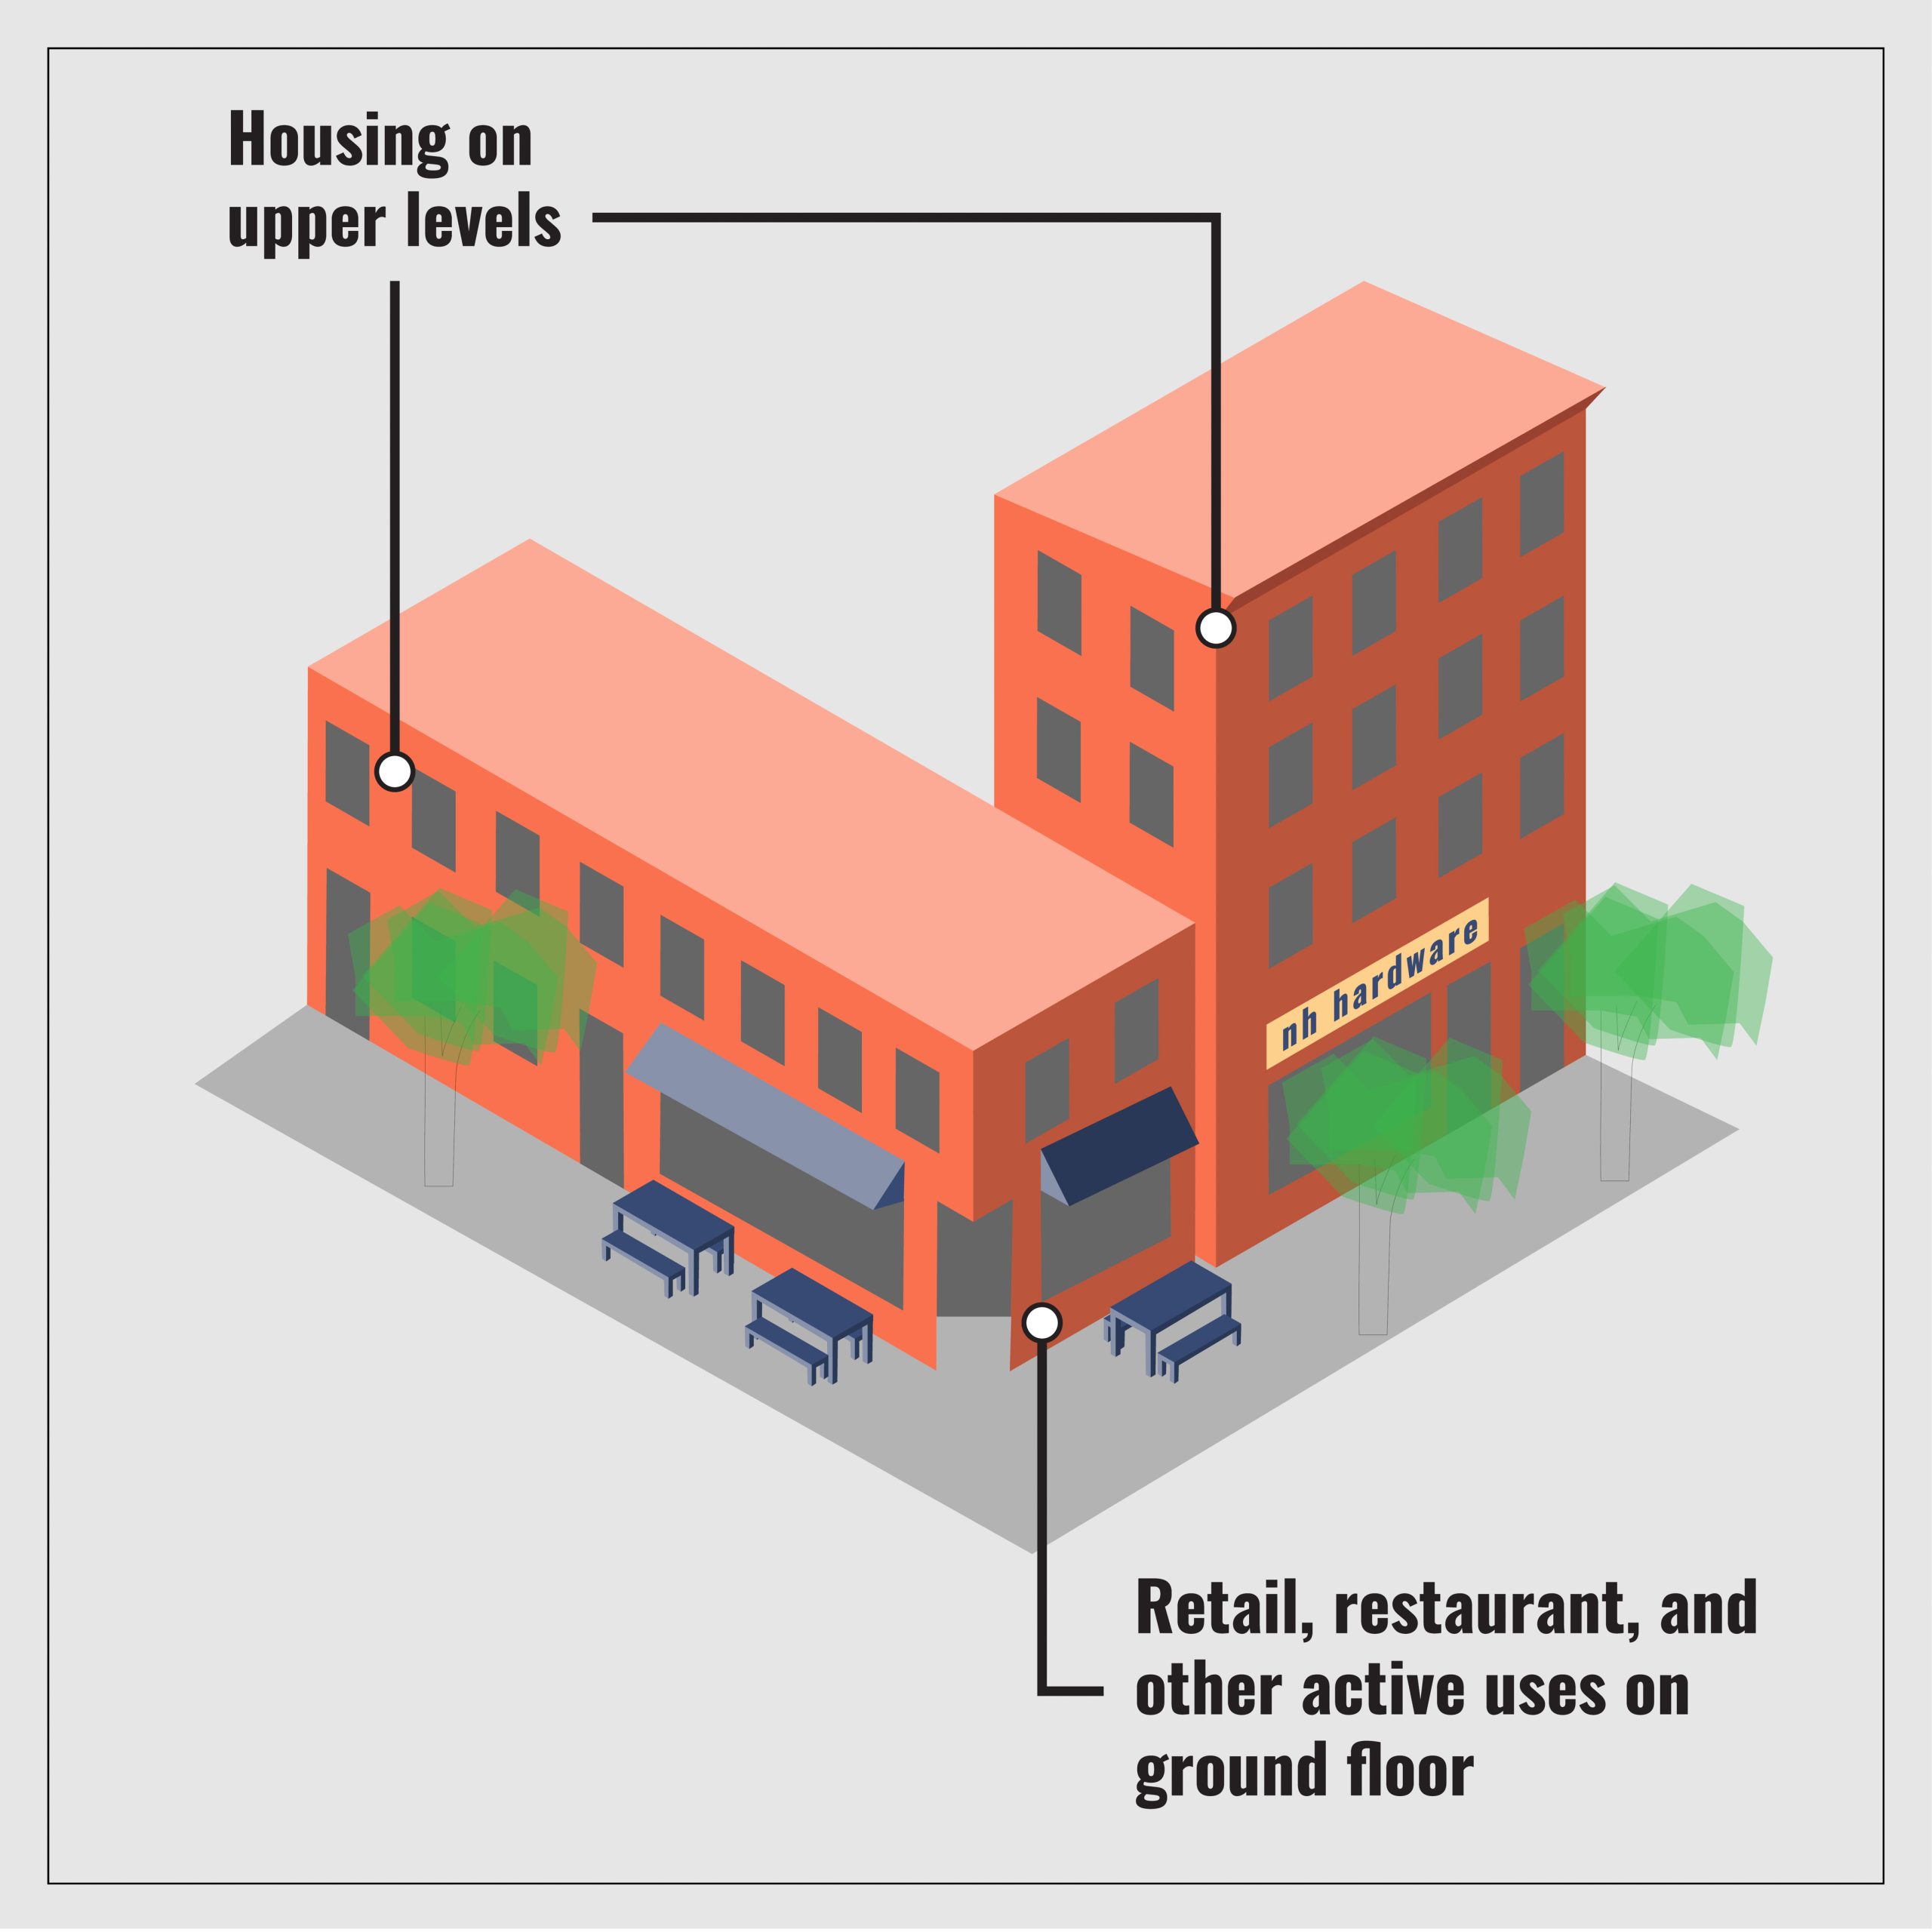 An axonometric diagram of two buildings next to each other. One building is four stories with two entrances. On the bottom story there is a sign for "nh hardware." The second building is two stories with three entrances (including a corner entrance), awnings, and cafe tables). The drawing is labeled "Retail, restaurant, and other active uses on ground floor" and "Housing on upper levels."